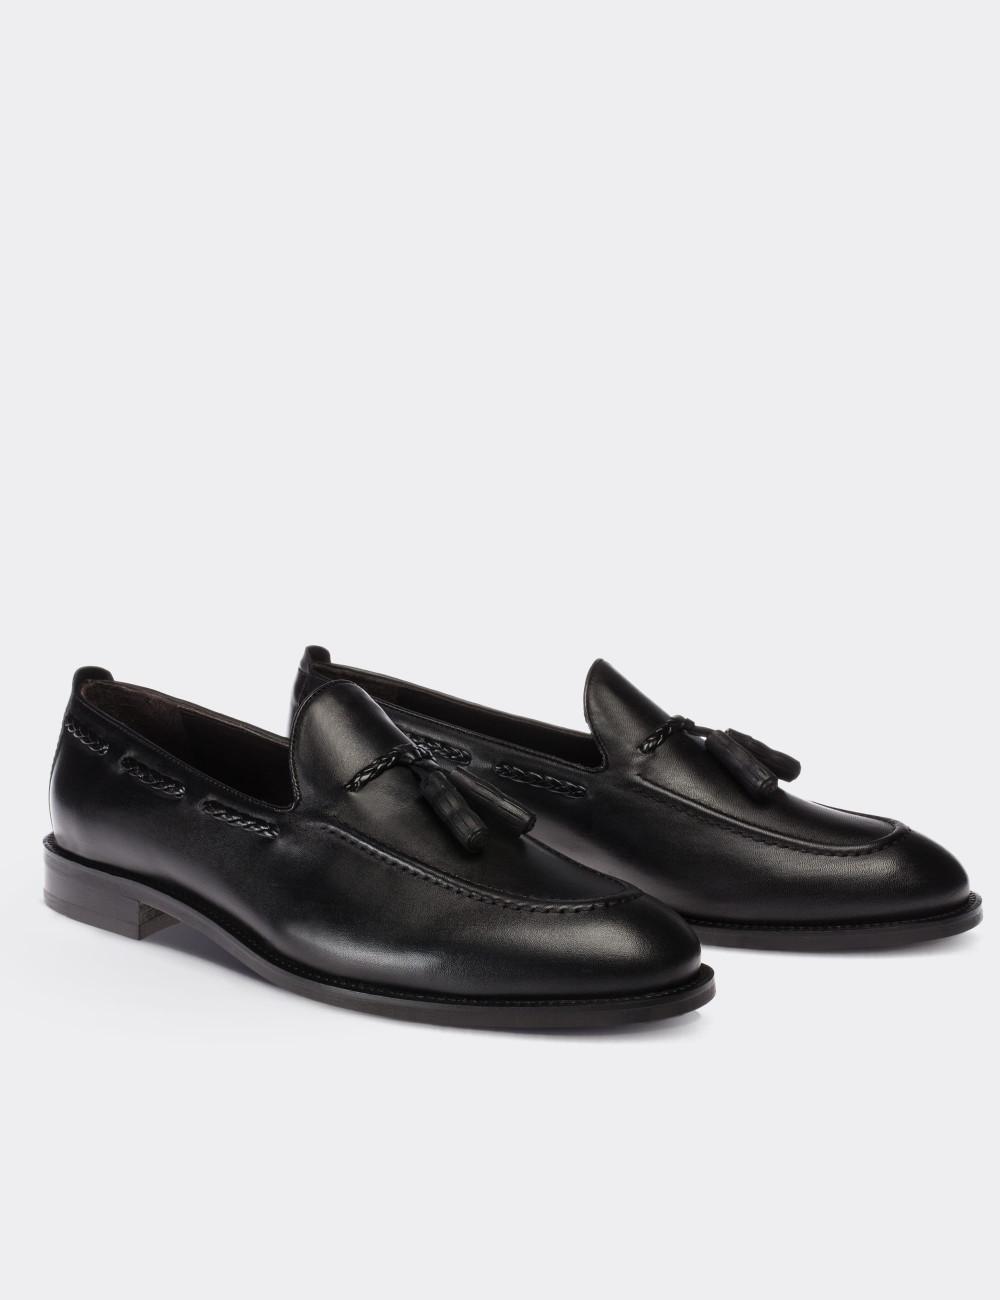 Black Leather Loafers - Deery